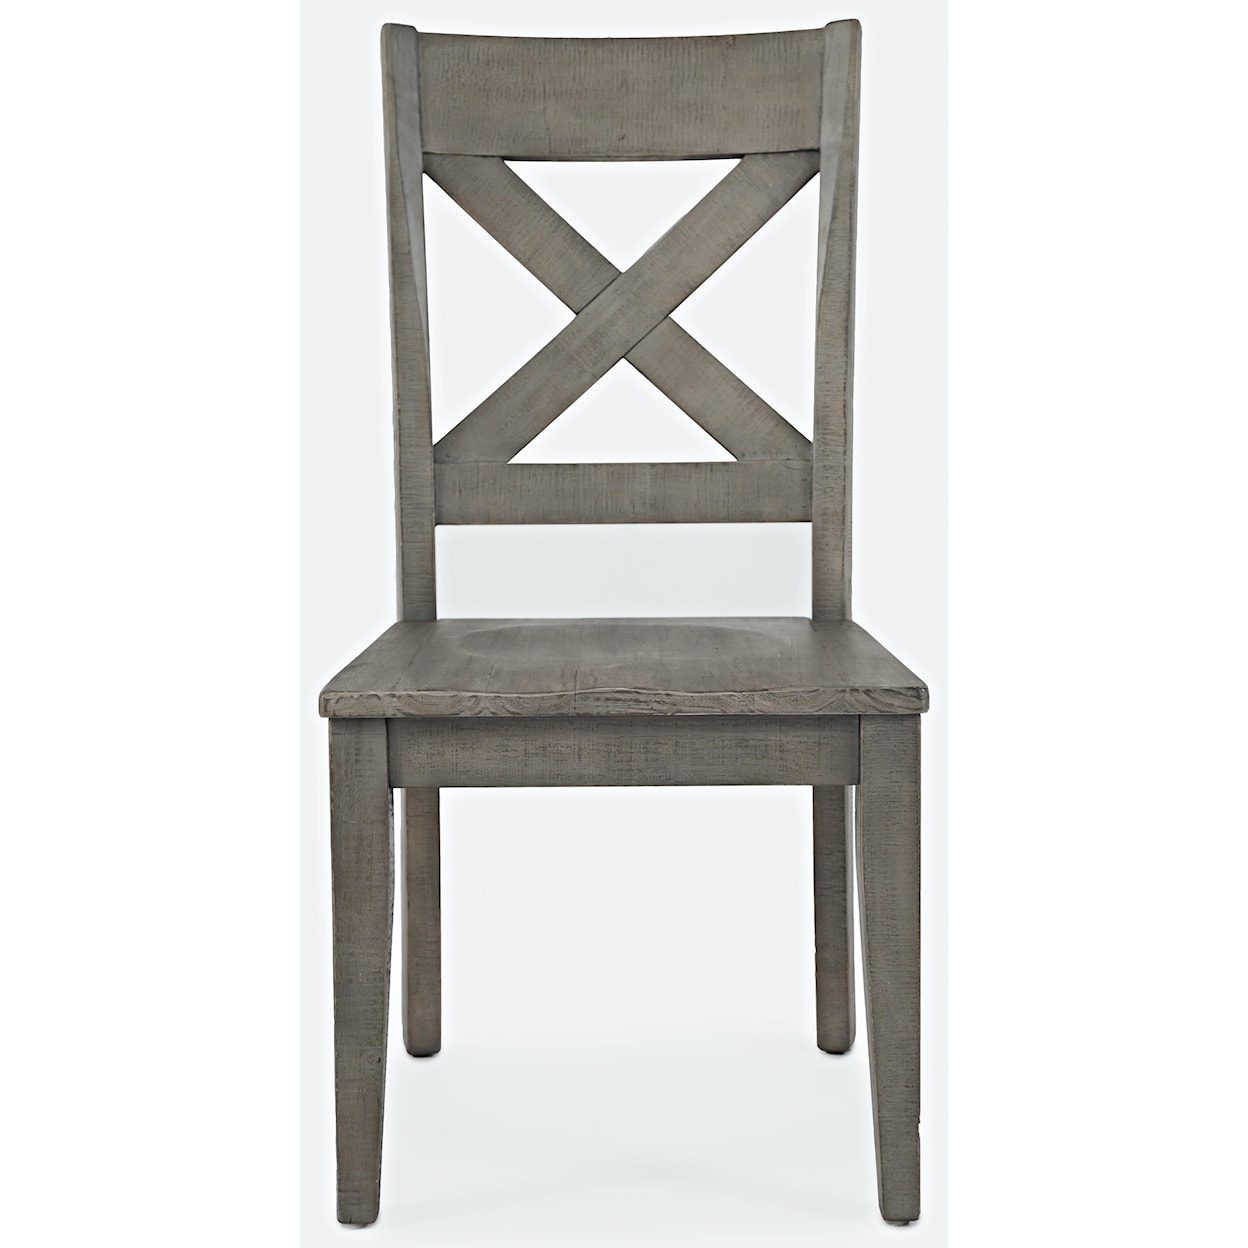 VFM Signature Outer Banks X-Back Chair